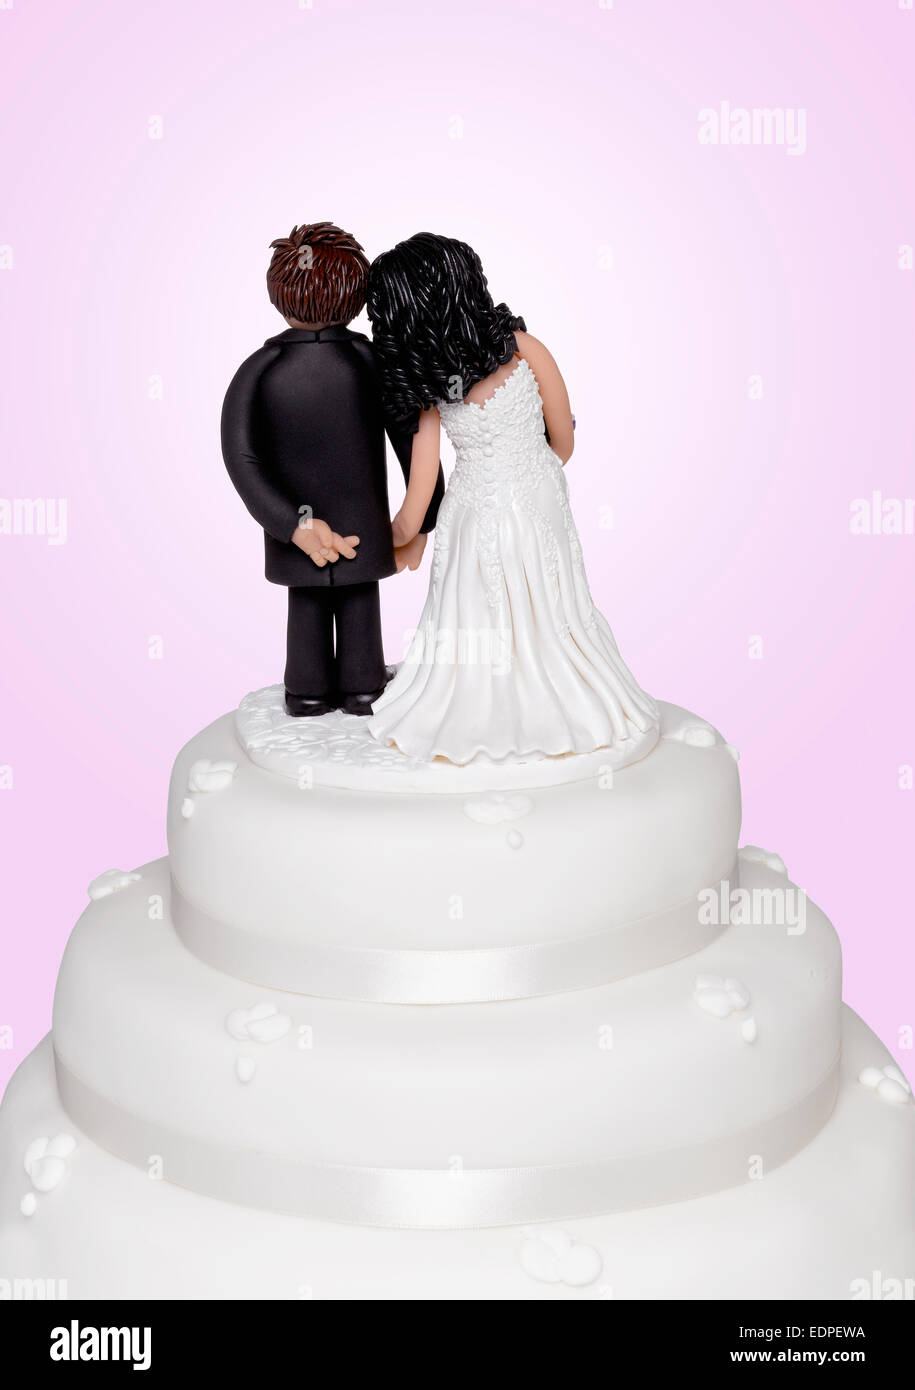 A cake topper showing the groom crossing his fingers Stock Photo